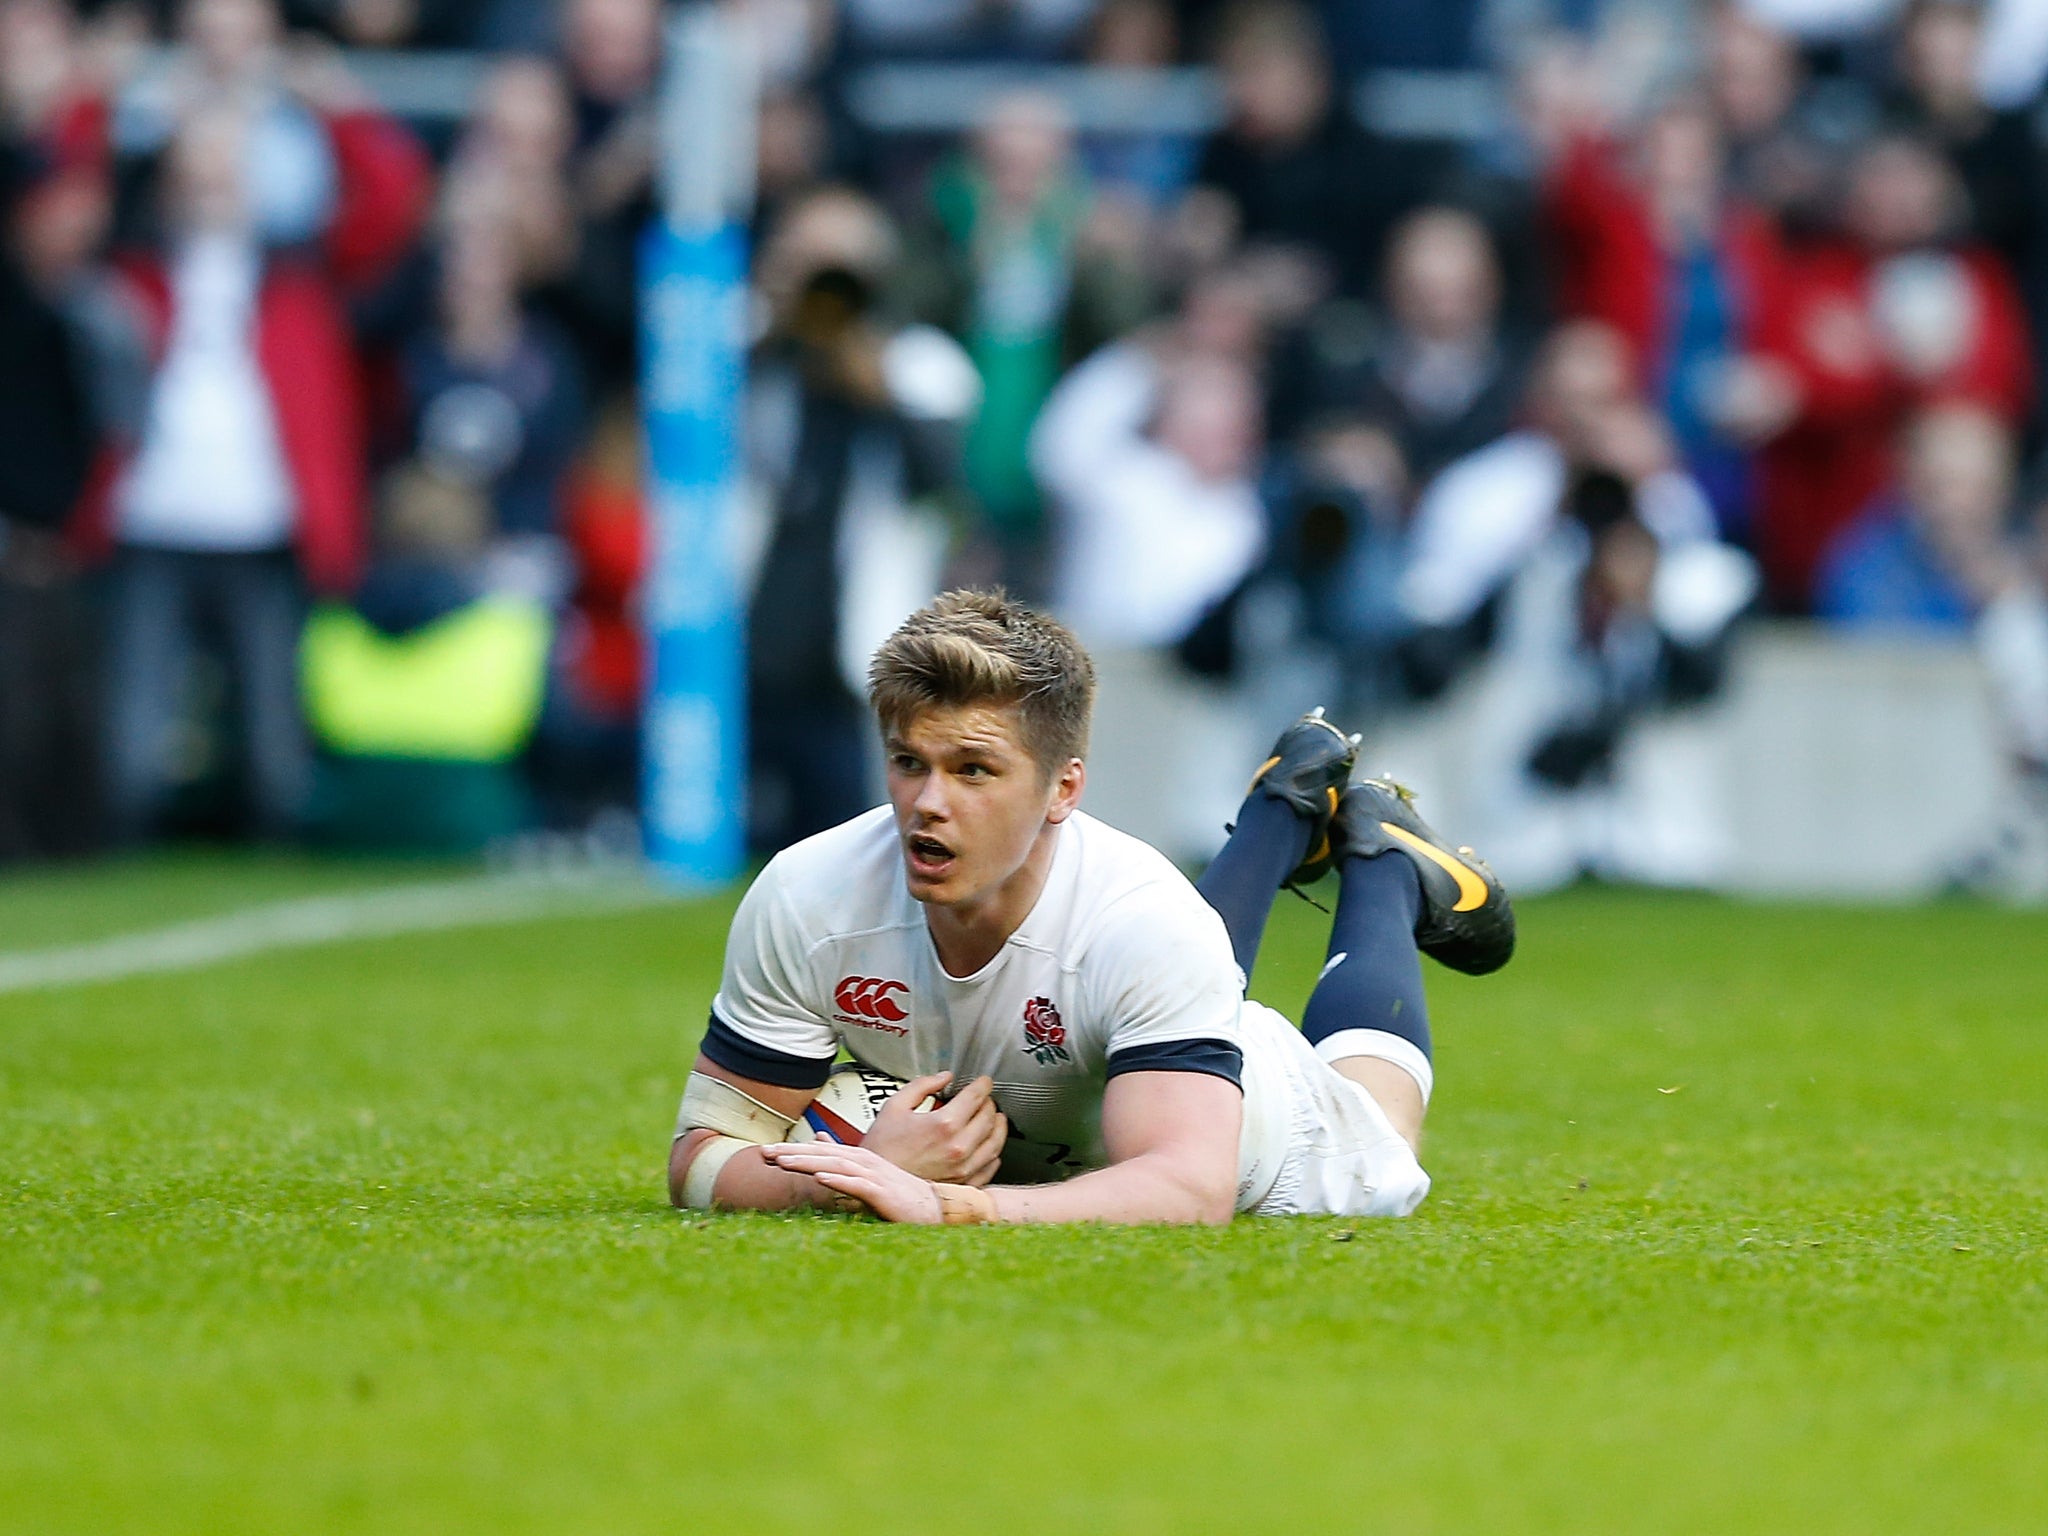 Owen Farrell scores his first try for England in their 20-13 win over Australia